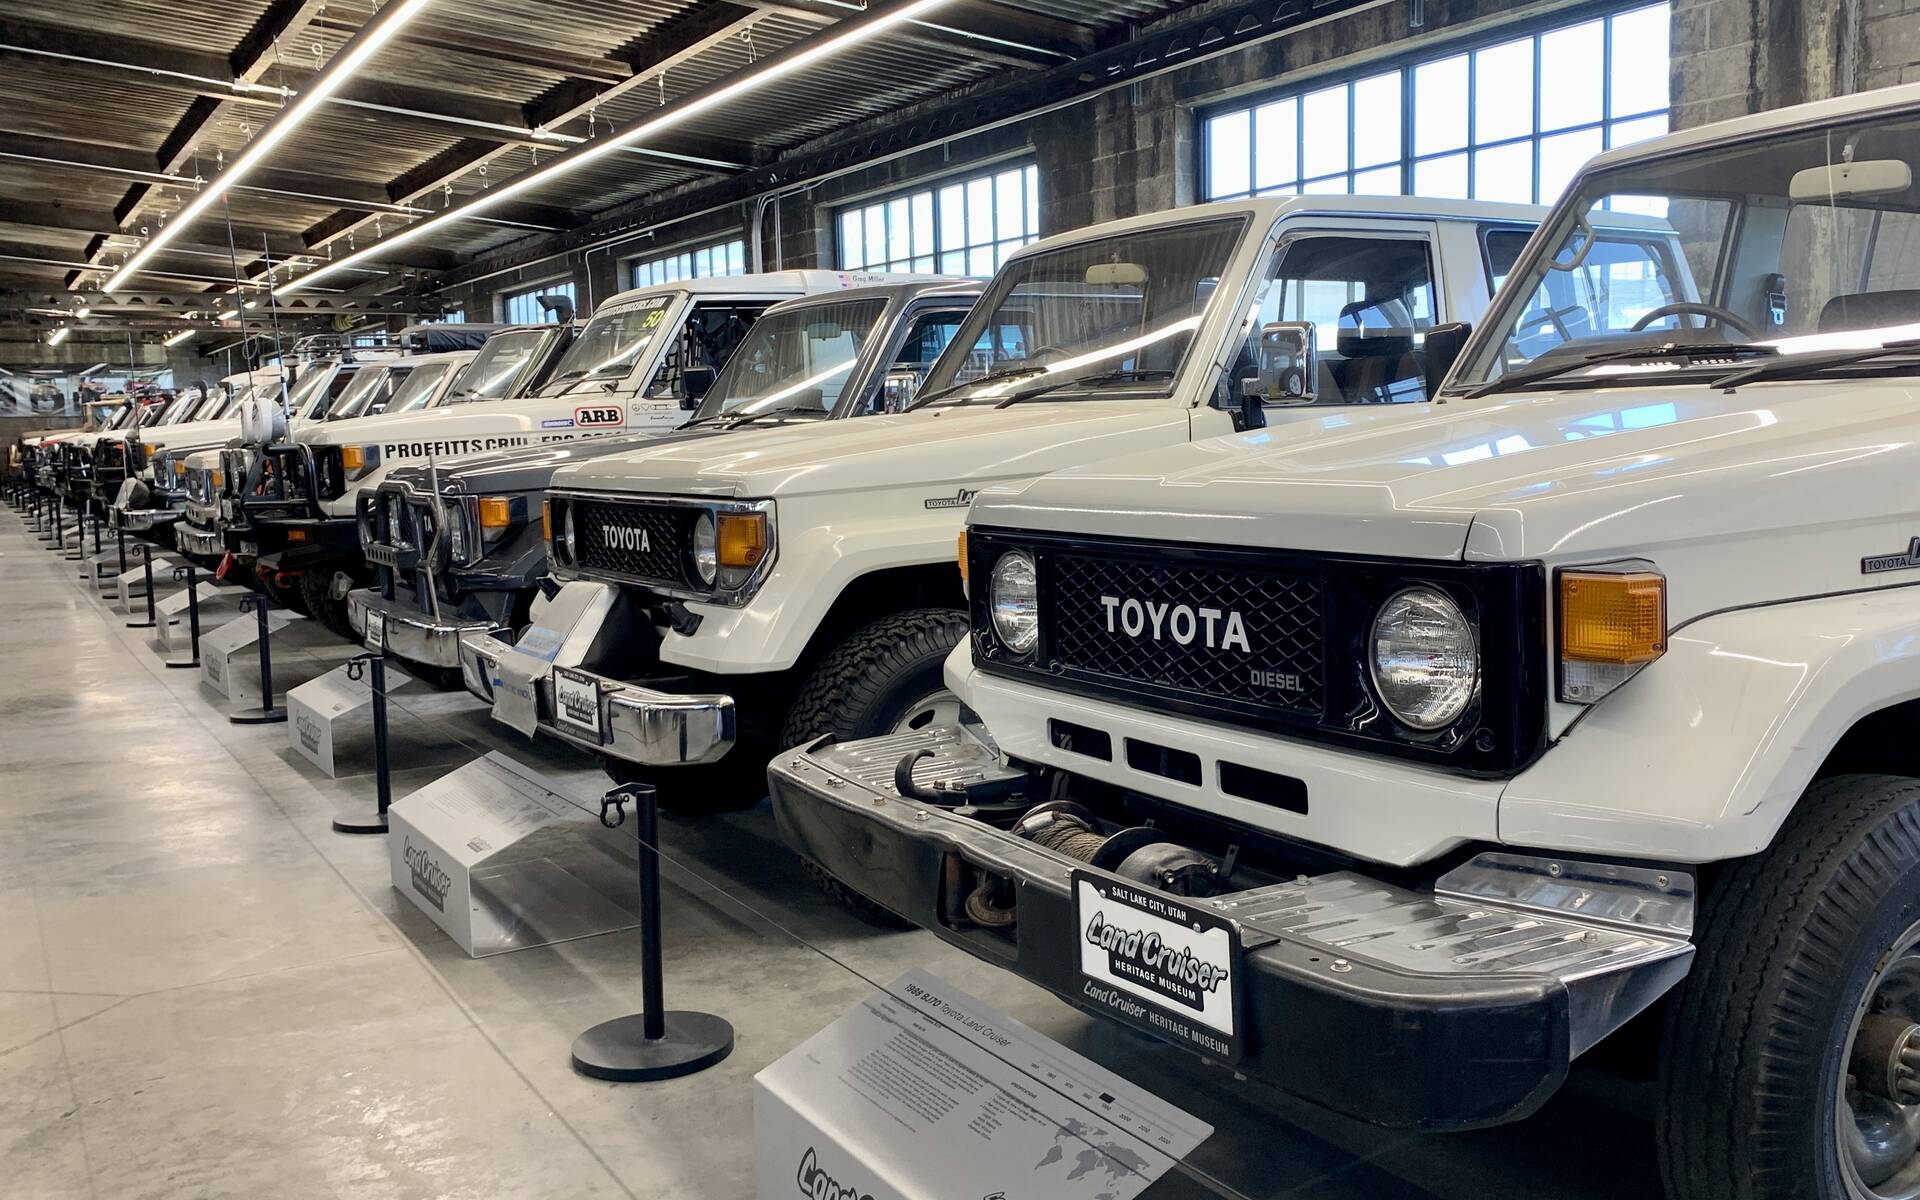 <p><strong>Toyota Land Cruiser Heritage Museum</strong></p>